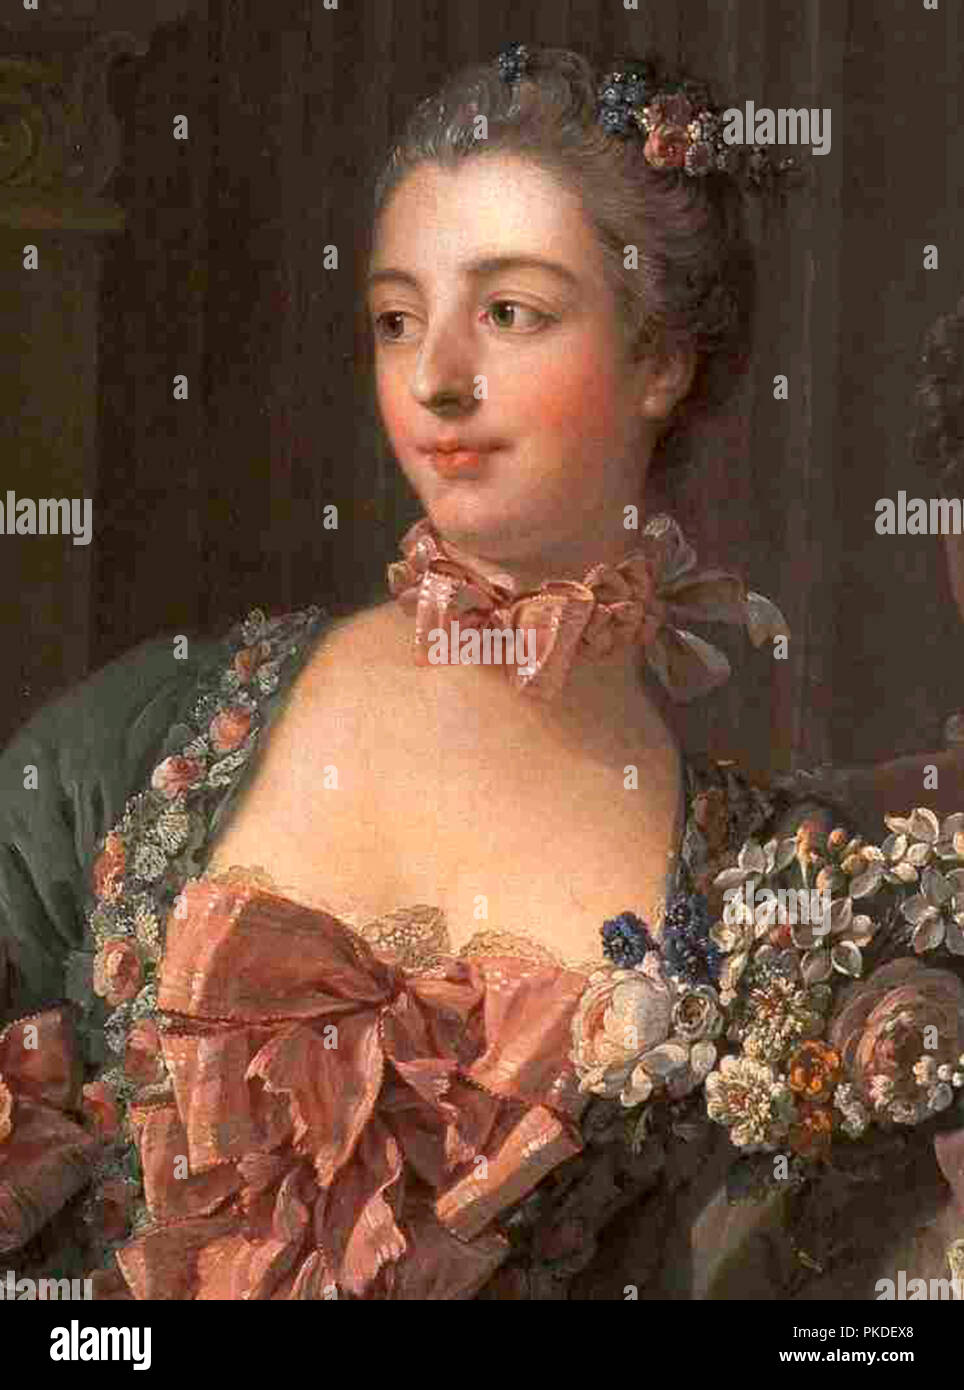 Jeanne Antoinette Poisson, Marquise de Pompadour, Jeanne Antoinette Poisson, Marquise de Pompadour (1721 – 1764), Madame de Pompadour, member of the French court and the official chief mistress of Louis XV from 1745 to 1751, Stock Photo